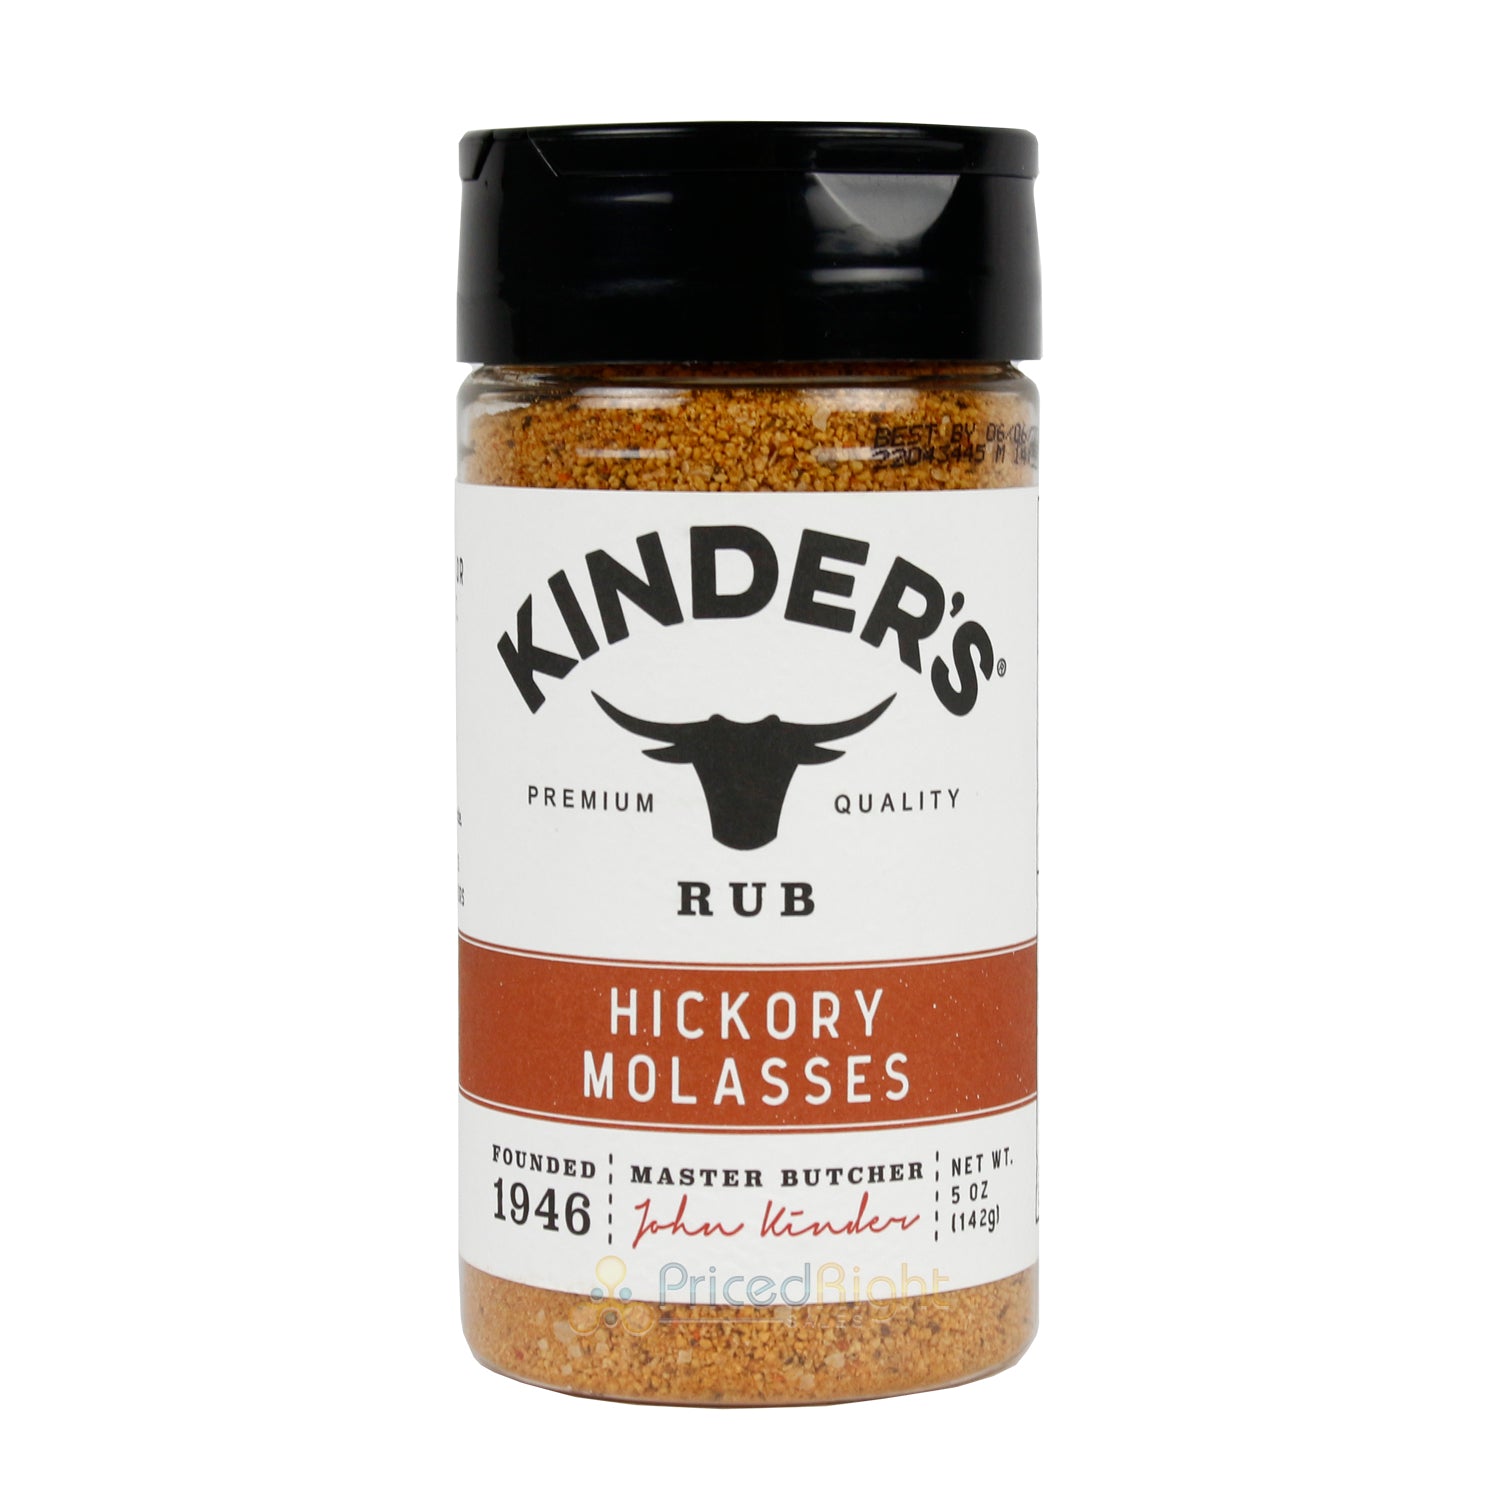 Kinder's Hickory Molasses Rub Hand Crafted With Brown Sugar No Added MSG 5 Oz